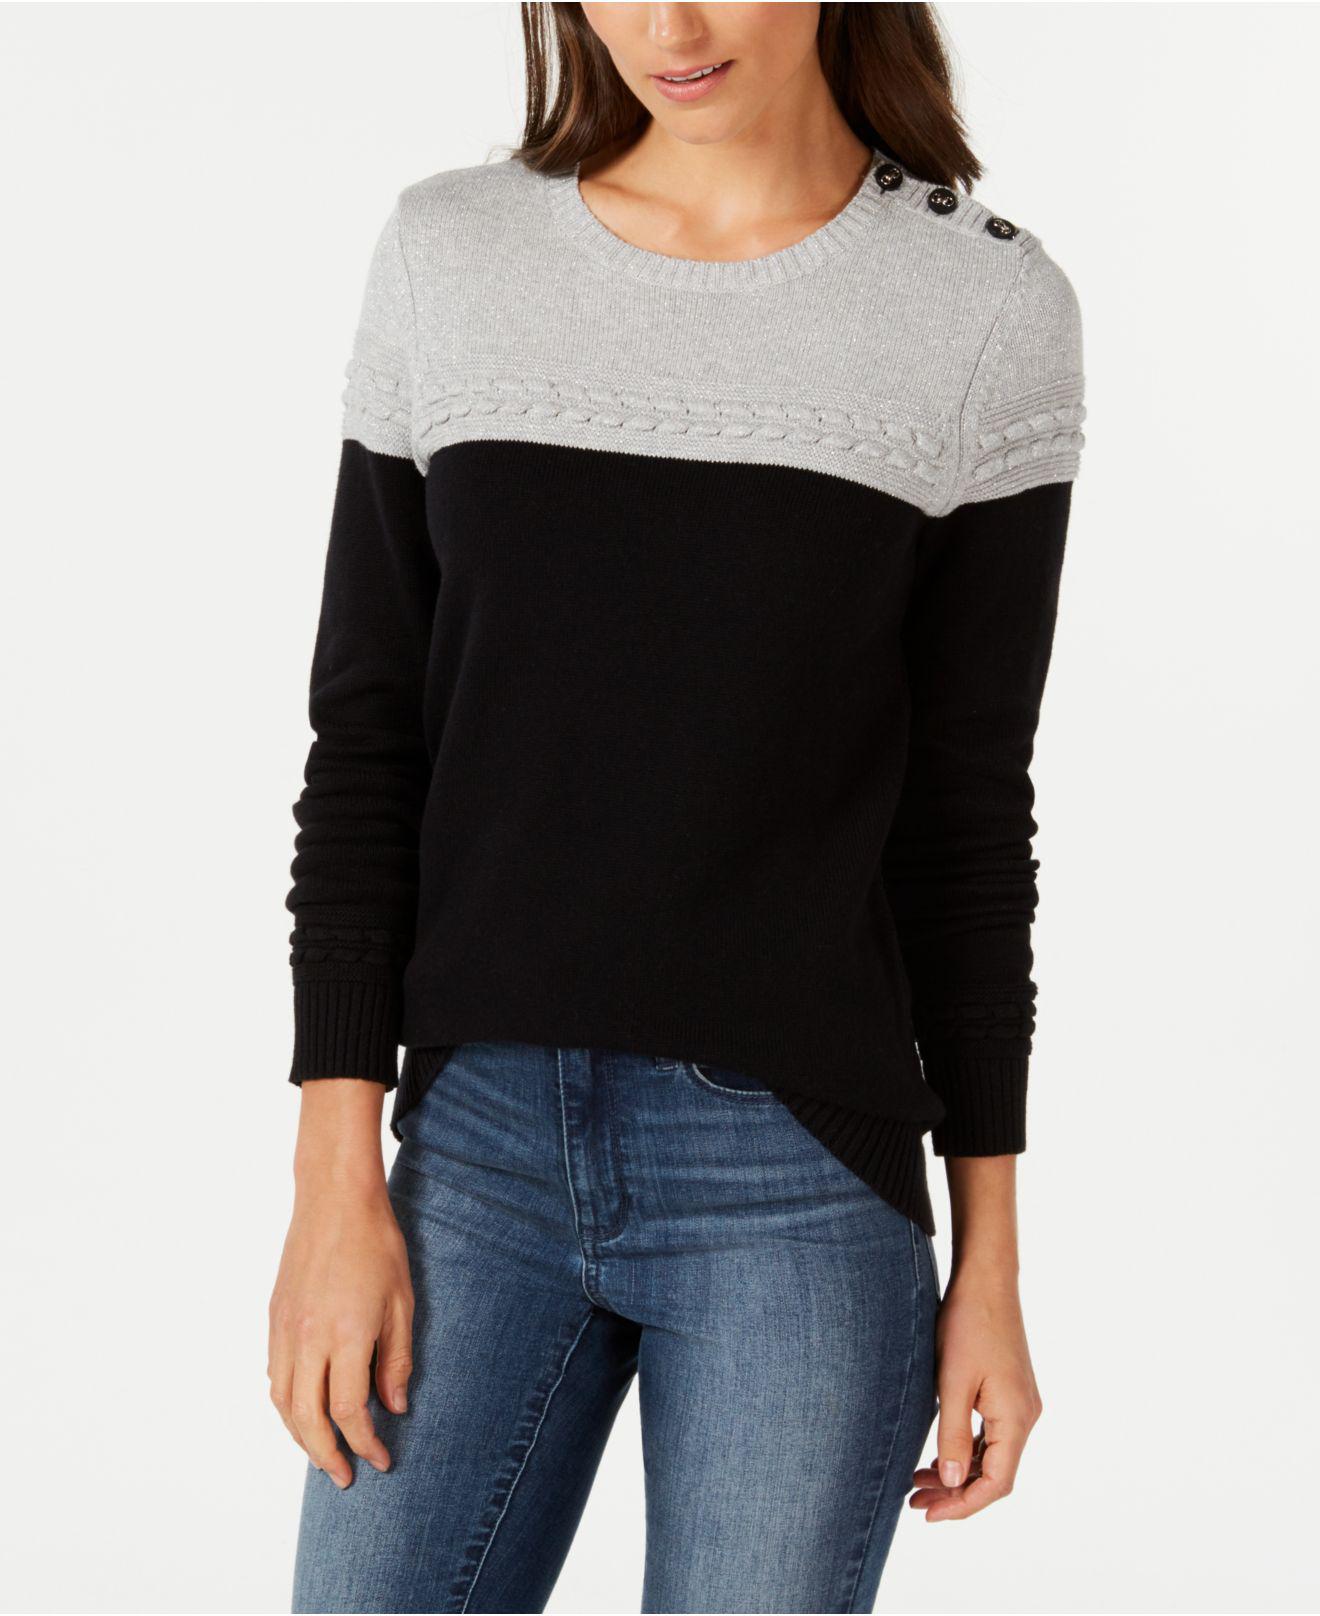 Lyst Charter Club Petite Colorblocked Buttontrim Sweater, Created